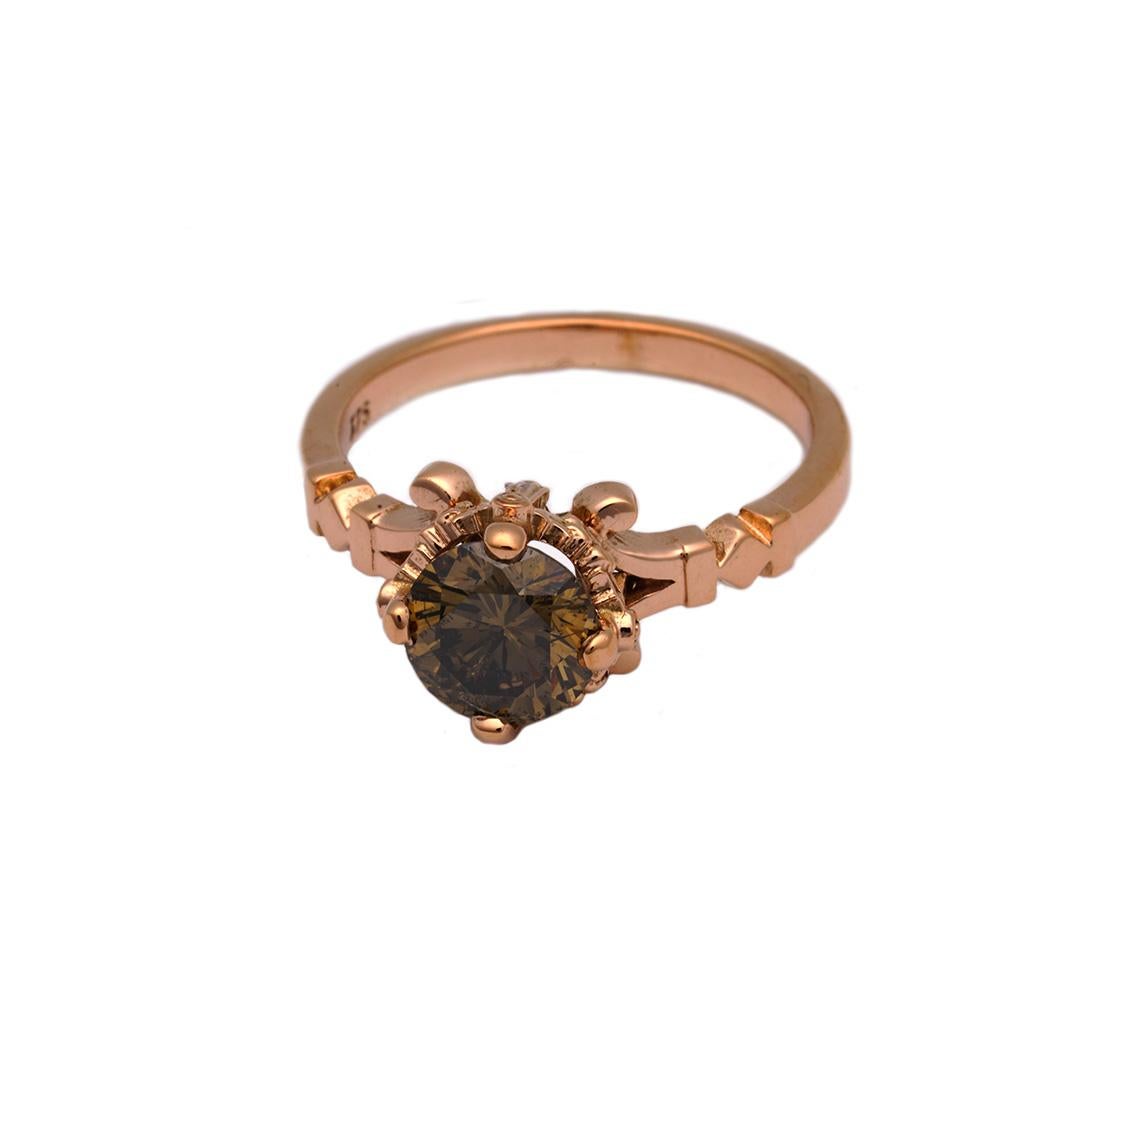 This 9kt rose gold ring is a feminine delight. 

Handmade in 9kt rose gold this stunning ring features a 4 claw set, round, brilliant cut, 0.90ct diamond, SI in clarity and deep cognac in colour. 

This breathtaking diamond is set in a signature